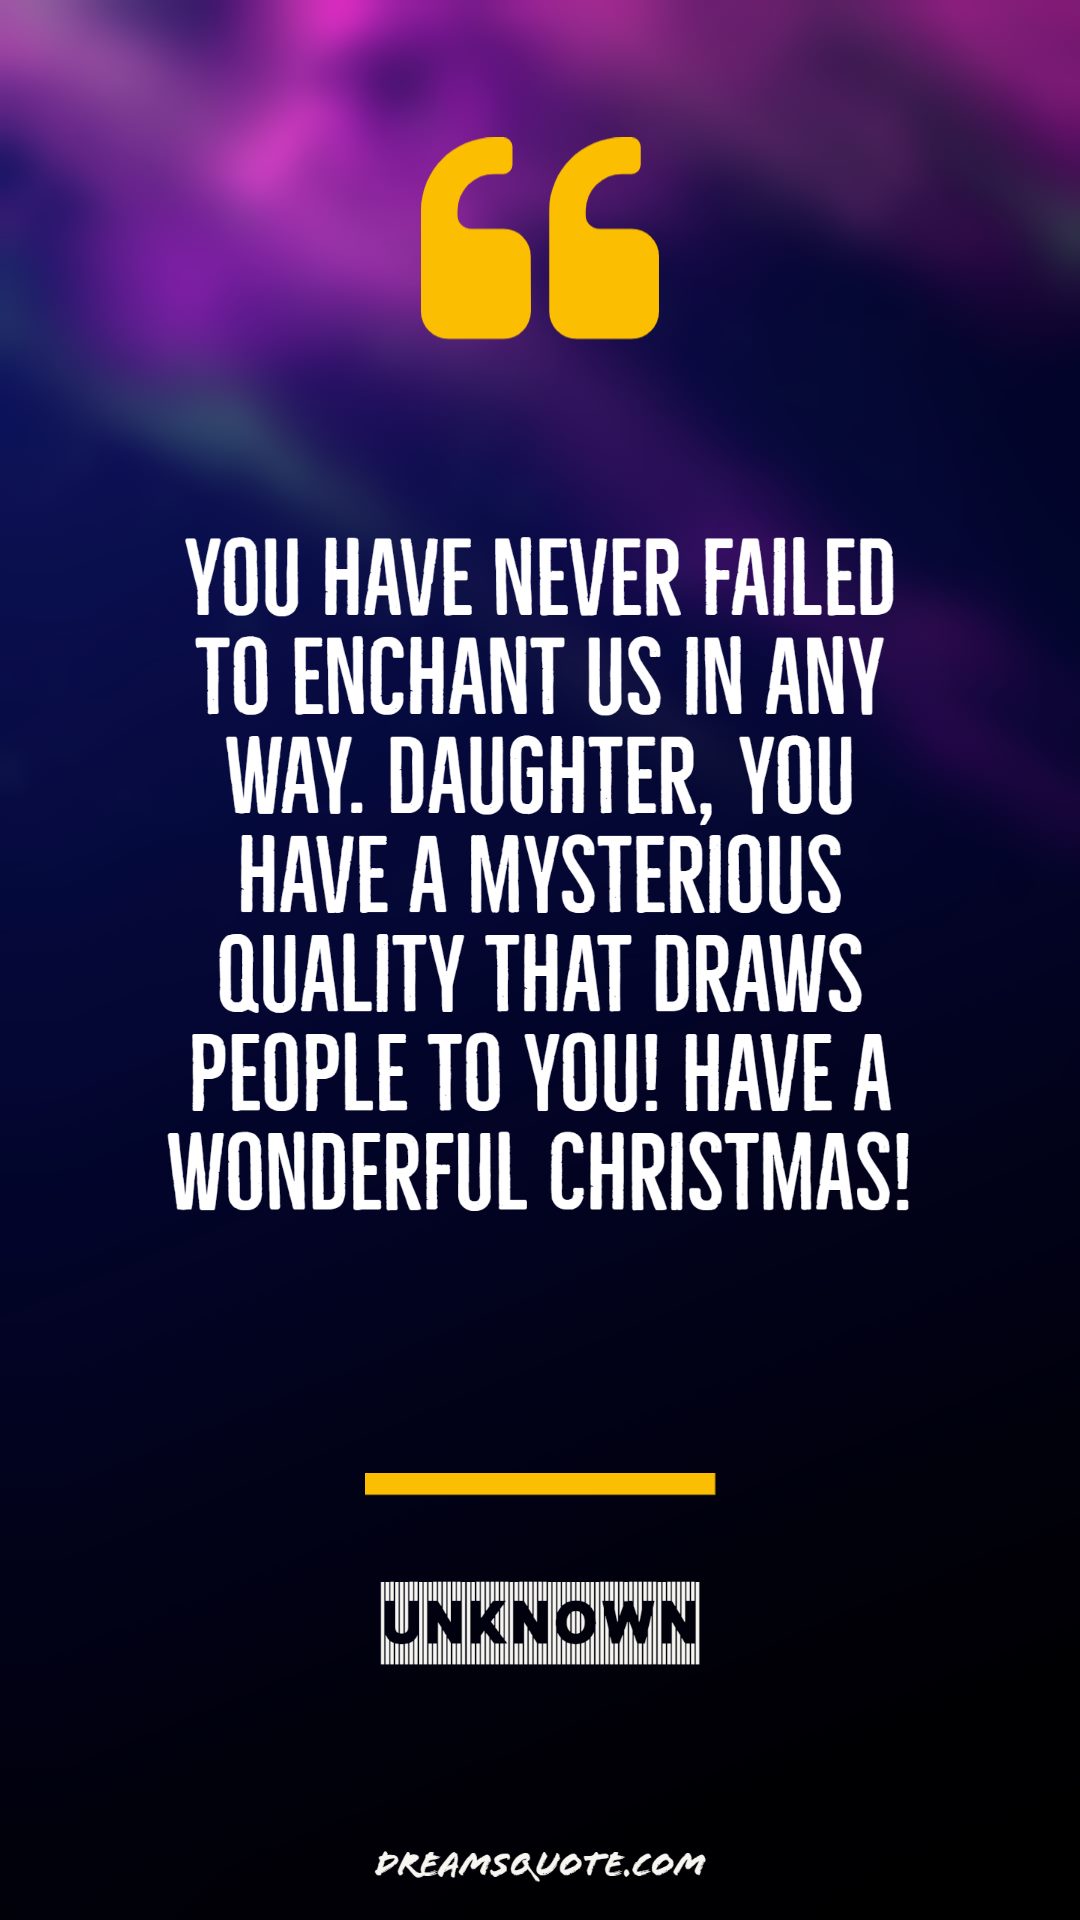 heartwarming christmas wishes for daughter from mother